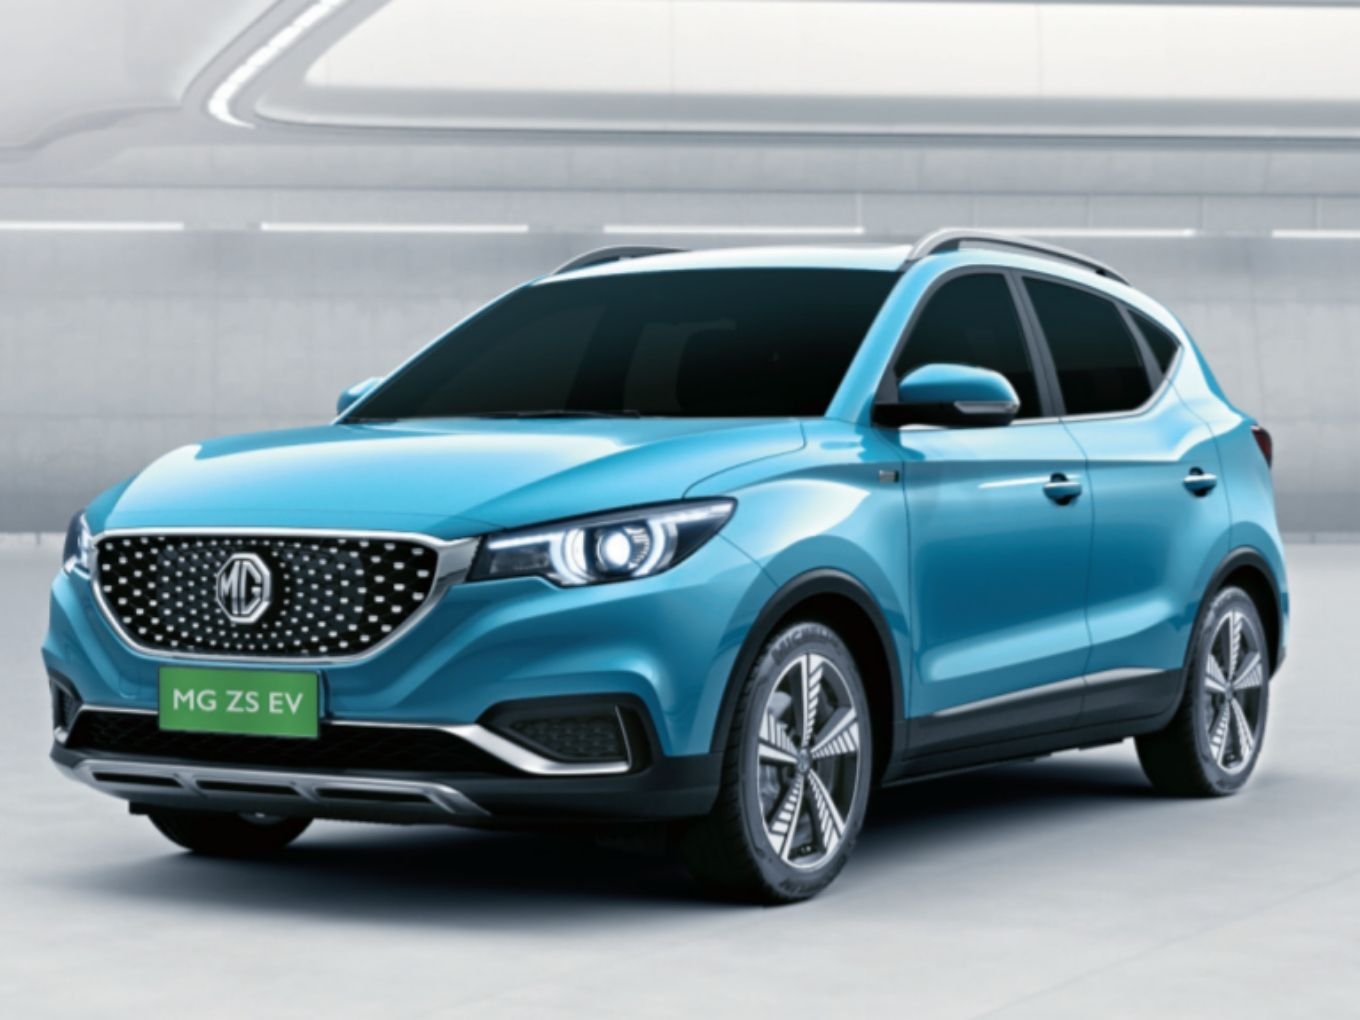 MG Motor To Launch Affordable Electric Vehicle After High-End MG ZS EV Launch